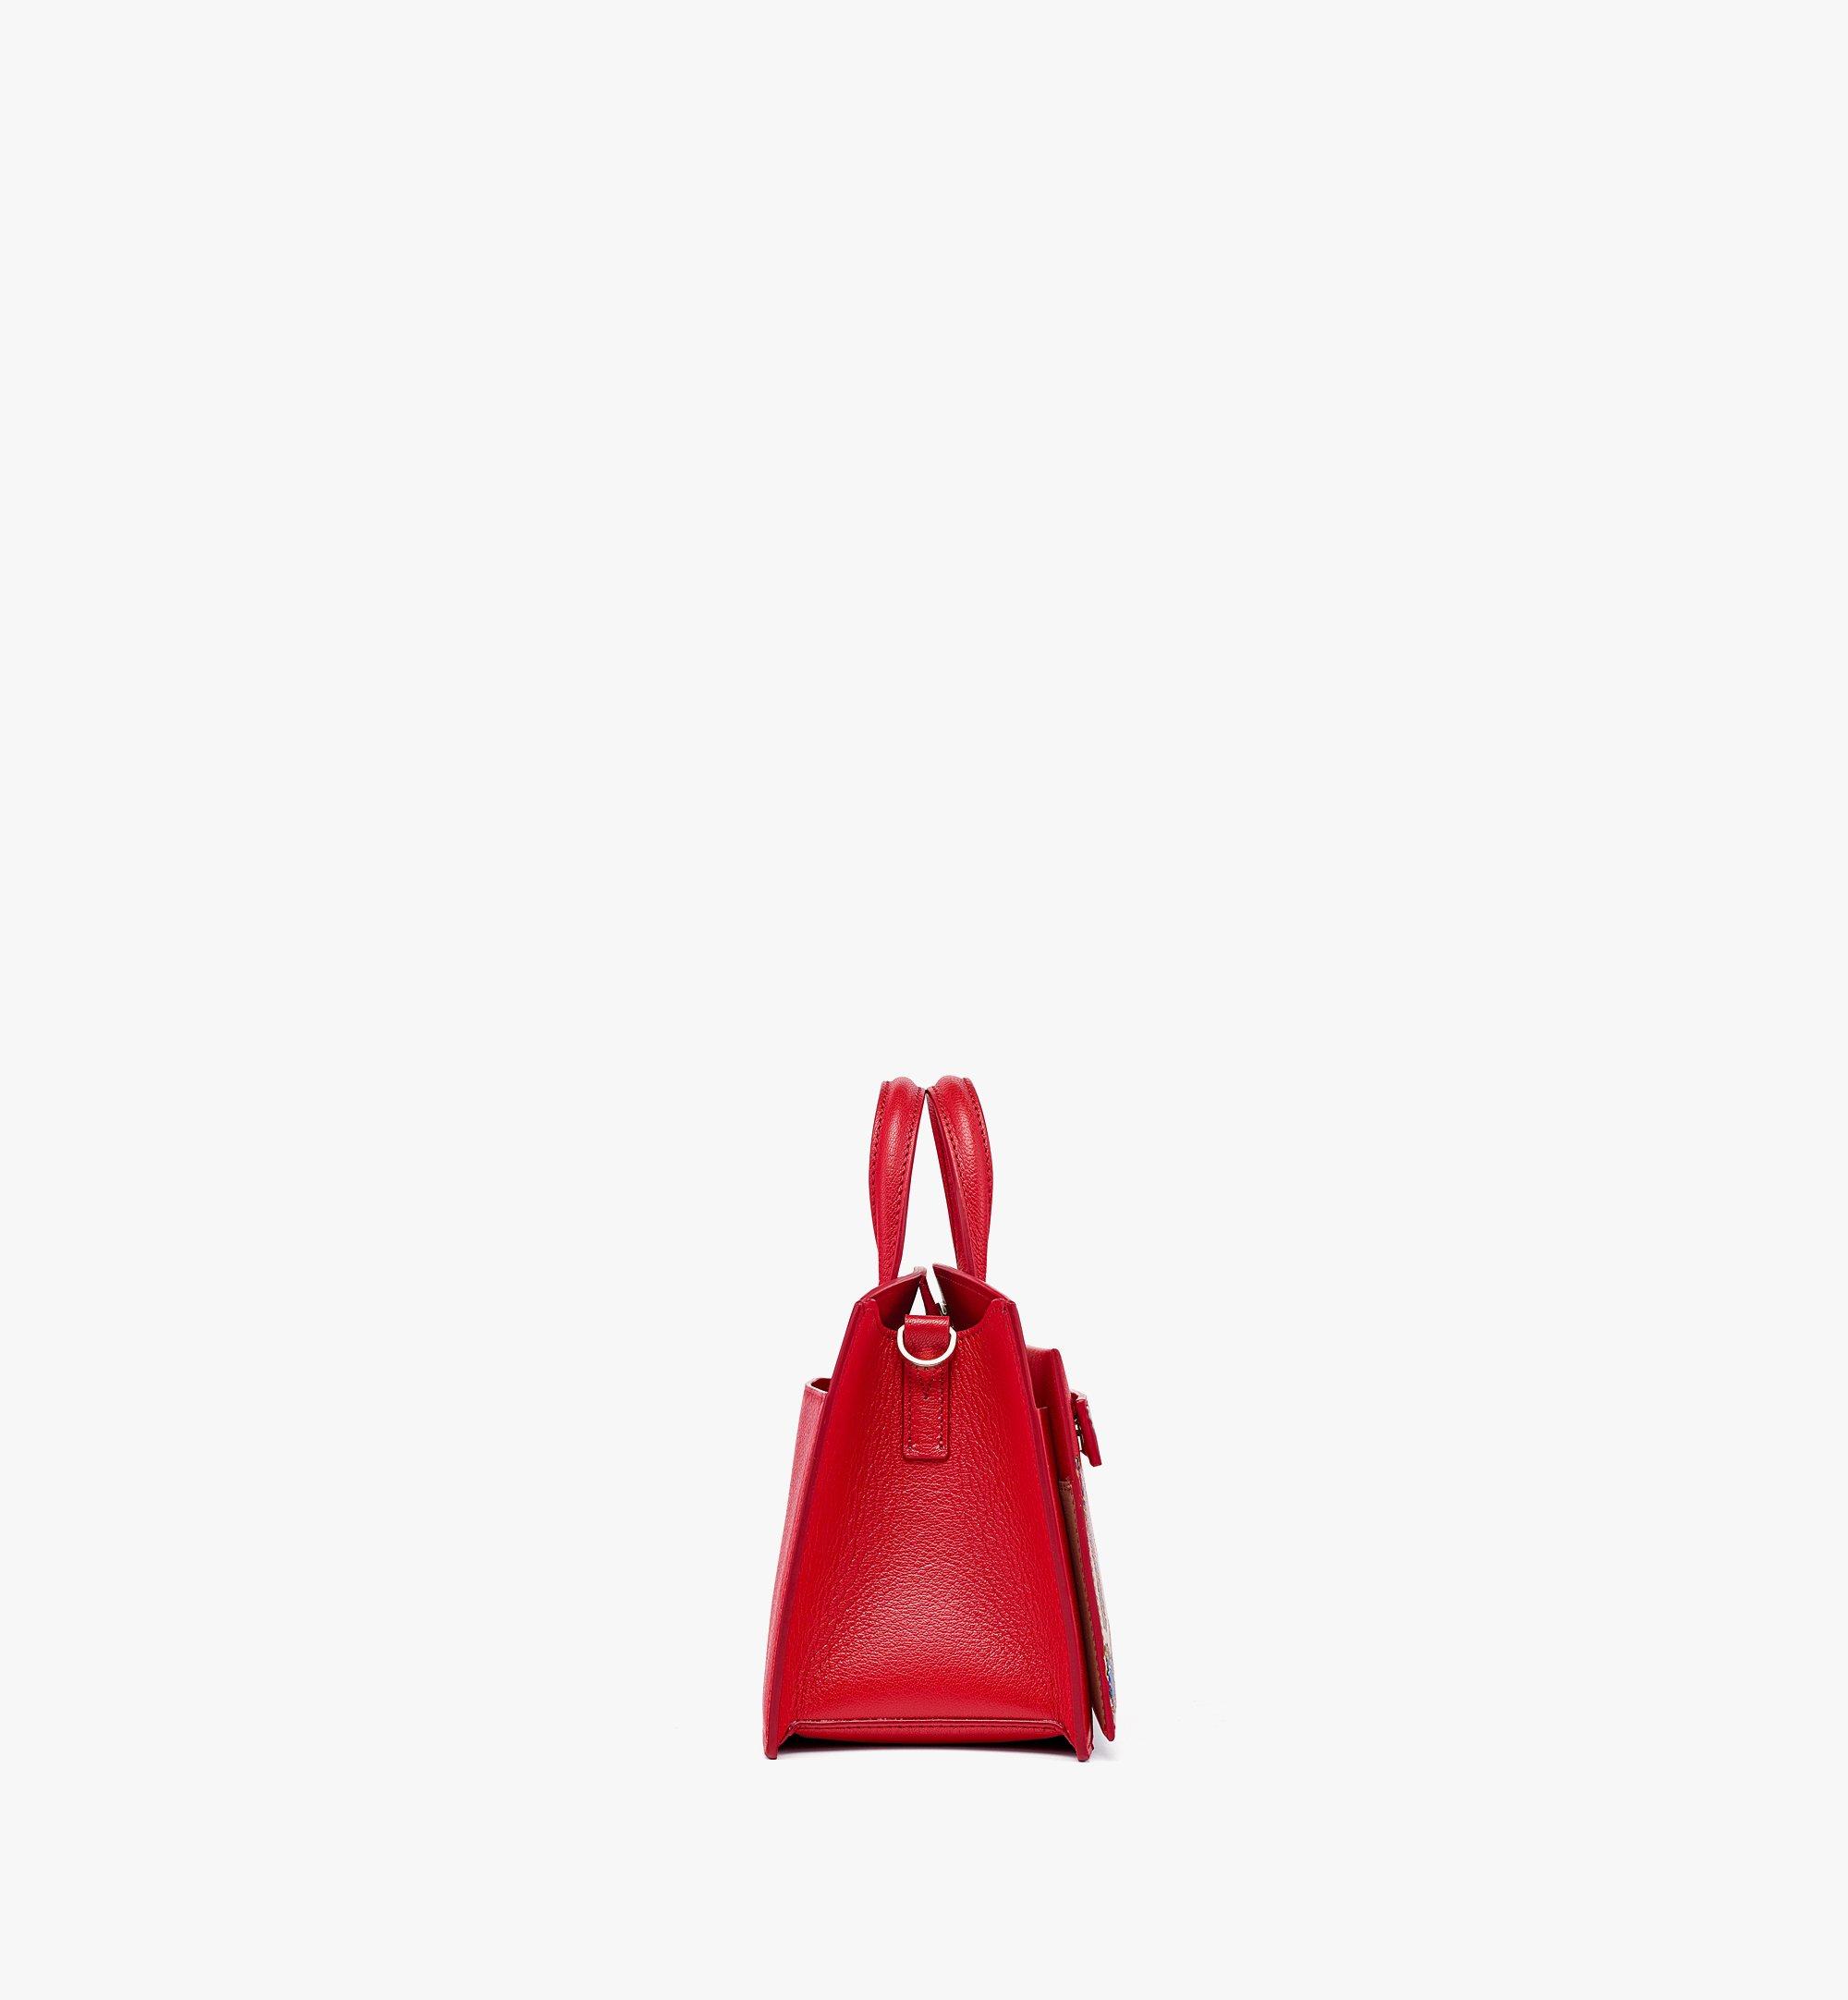 MCM Upcycling Project Jewelry Milano Tote in Gradient Goatskin Leather Red MWTCSUP03FJ001 Alternate View 1